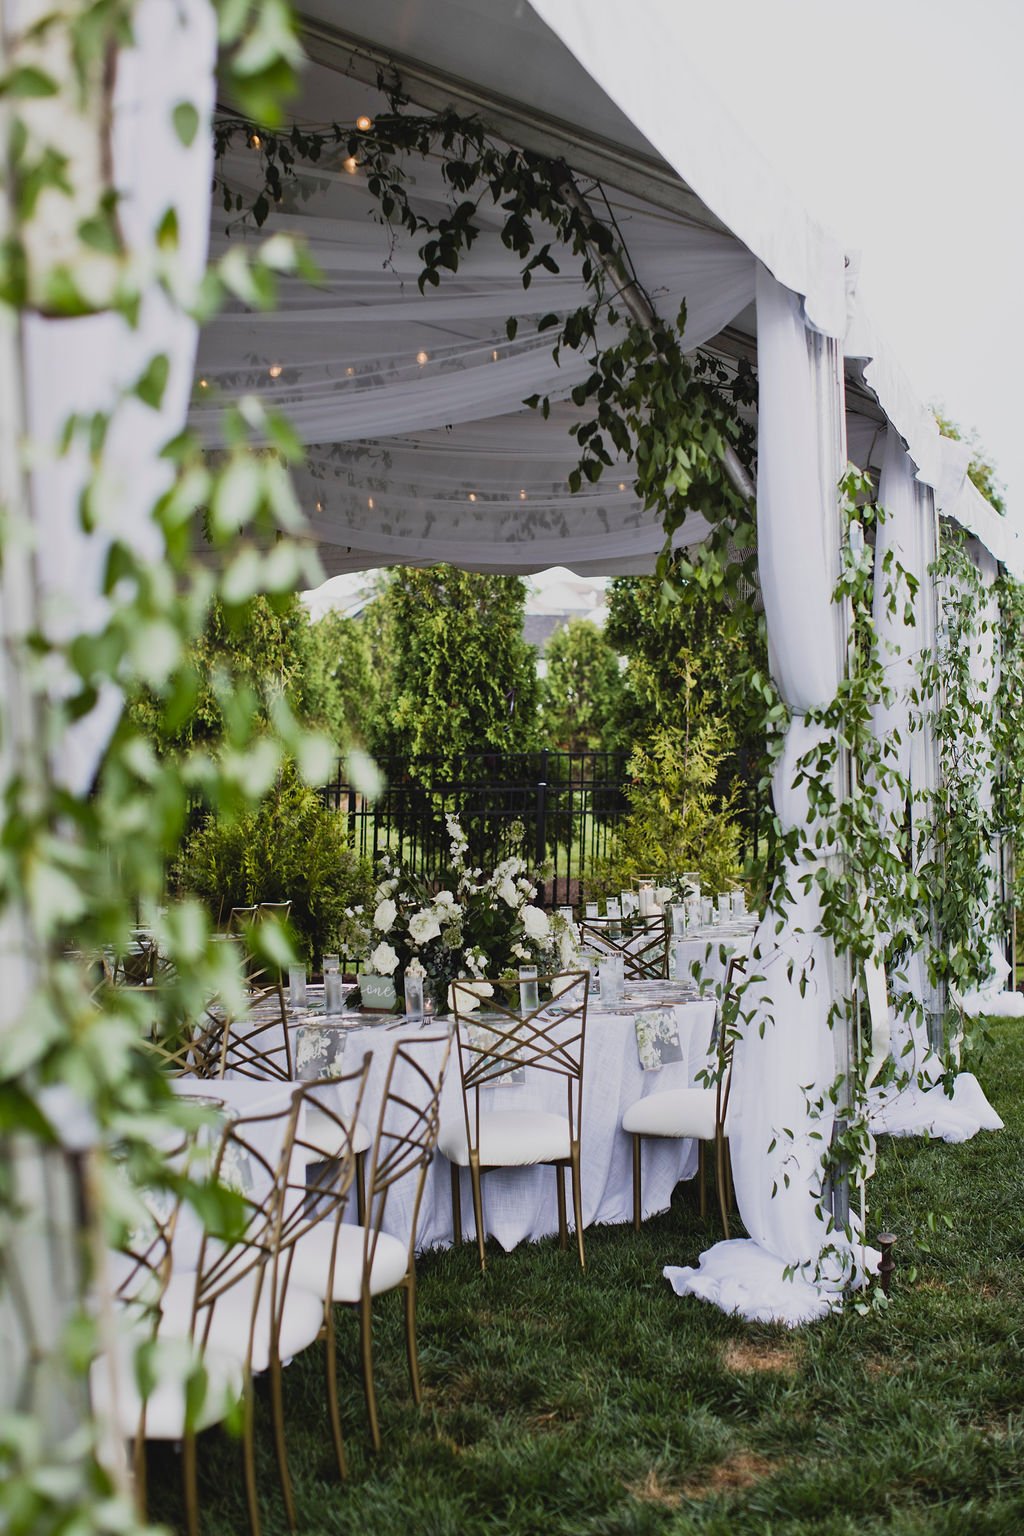 Gorgeous installations of smilax grew over the entrance to the tent, on the chandeliers, and all throughout the reception creating a warm, natural atmosphere. Designed by Rosemary and Finch in Nashville, TN.